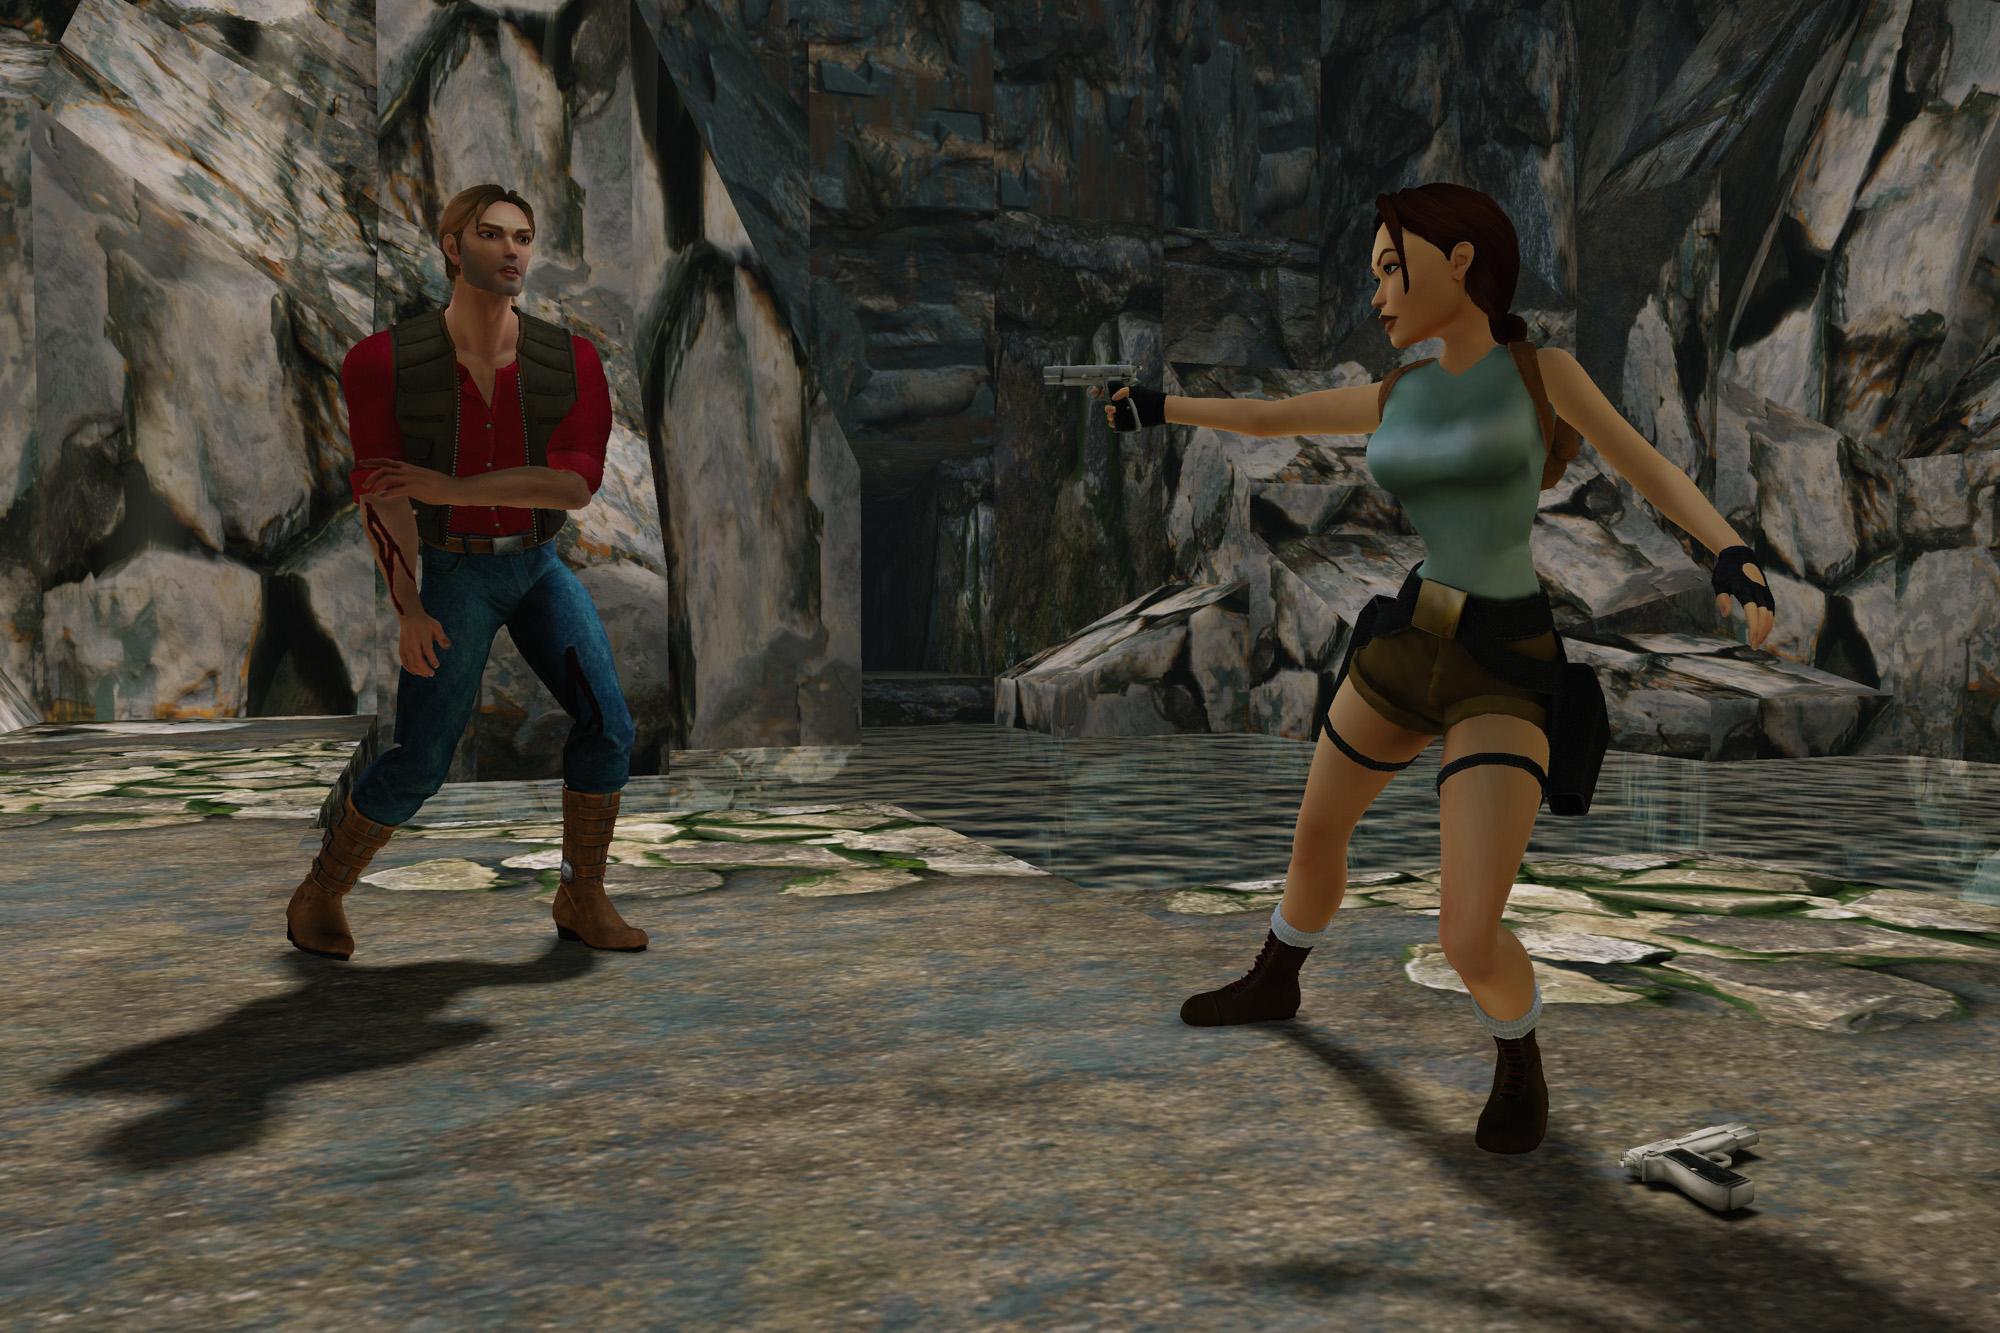 Lara pointing her gun at Larson in the Lost Valley.